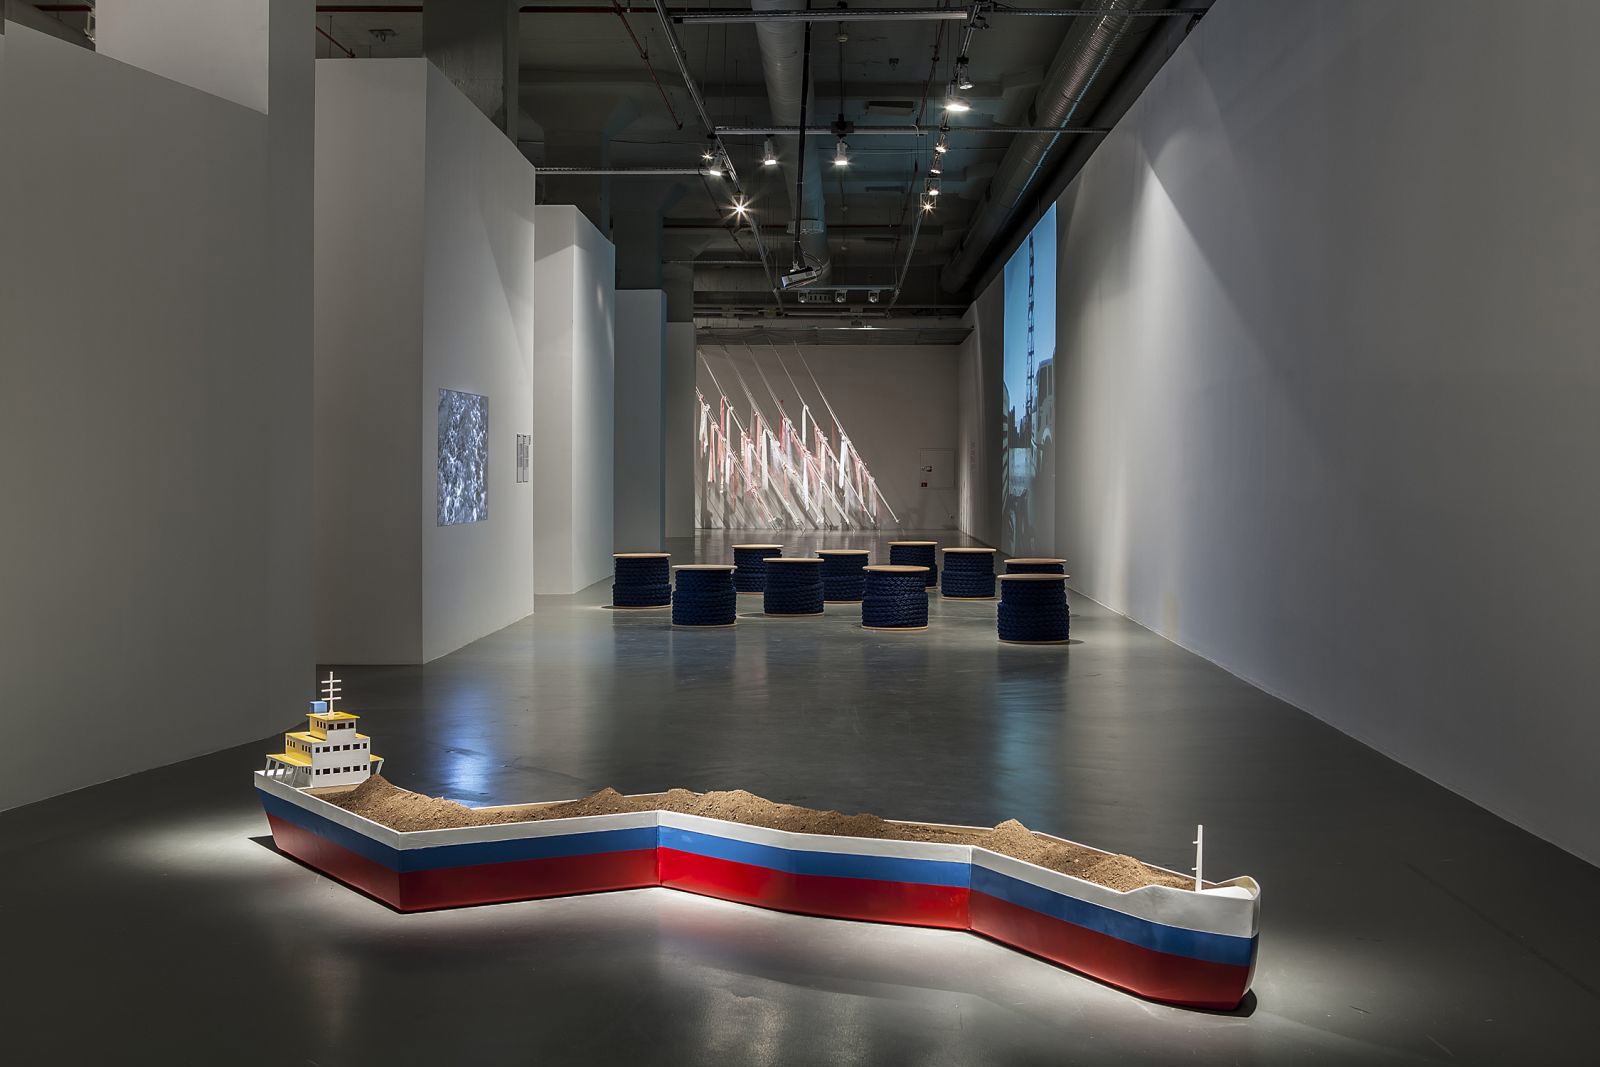 Istanbul Modern presents an exhibition that opens to the sea: "HARBOR"